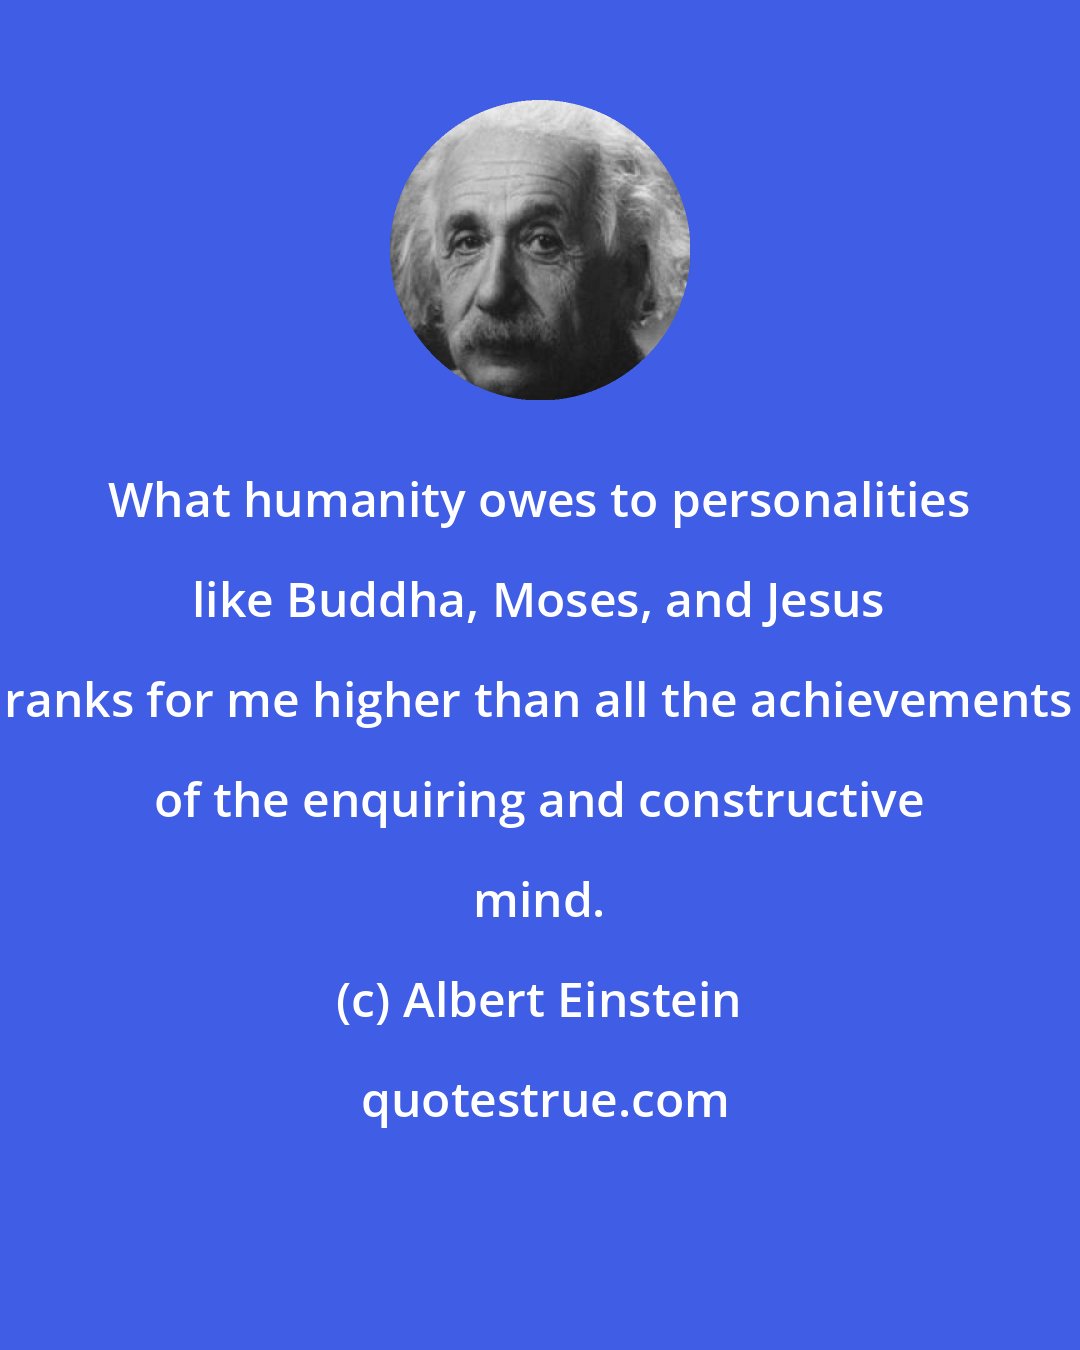 Albert Einstein: What humanity owes to personalities like Buddha, Moses, and Jesus ranks for me higher than all the achievements of the enquiring and constructive mind.